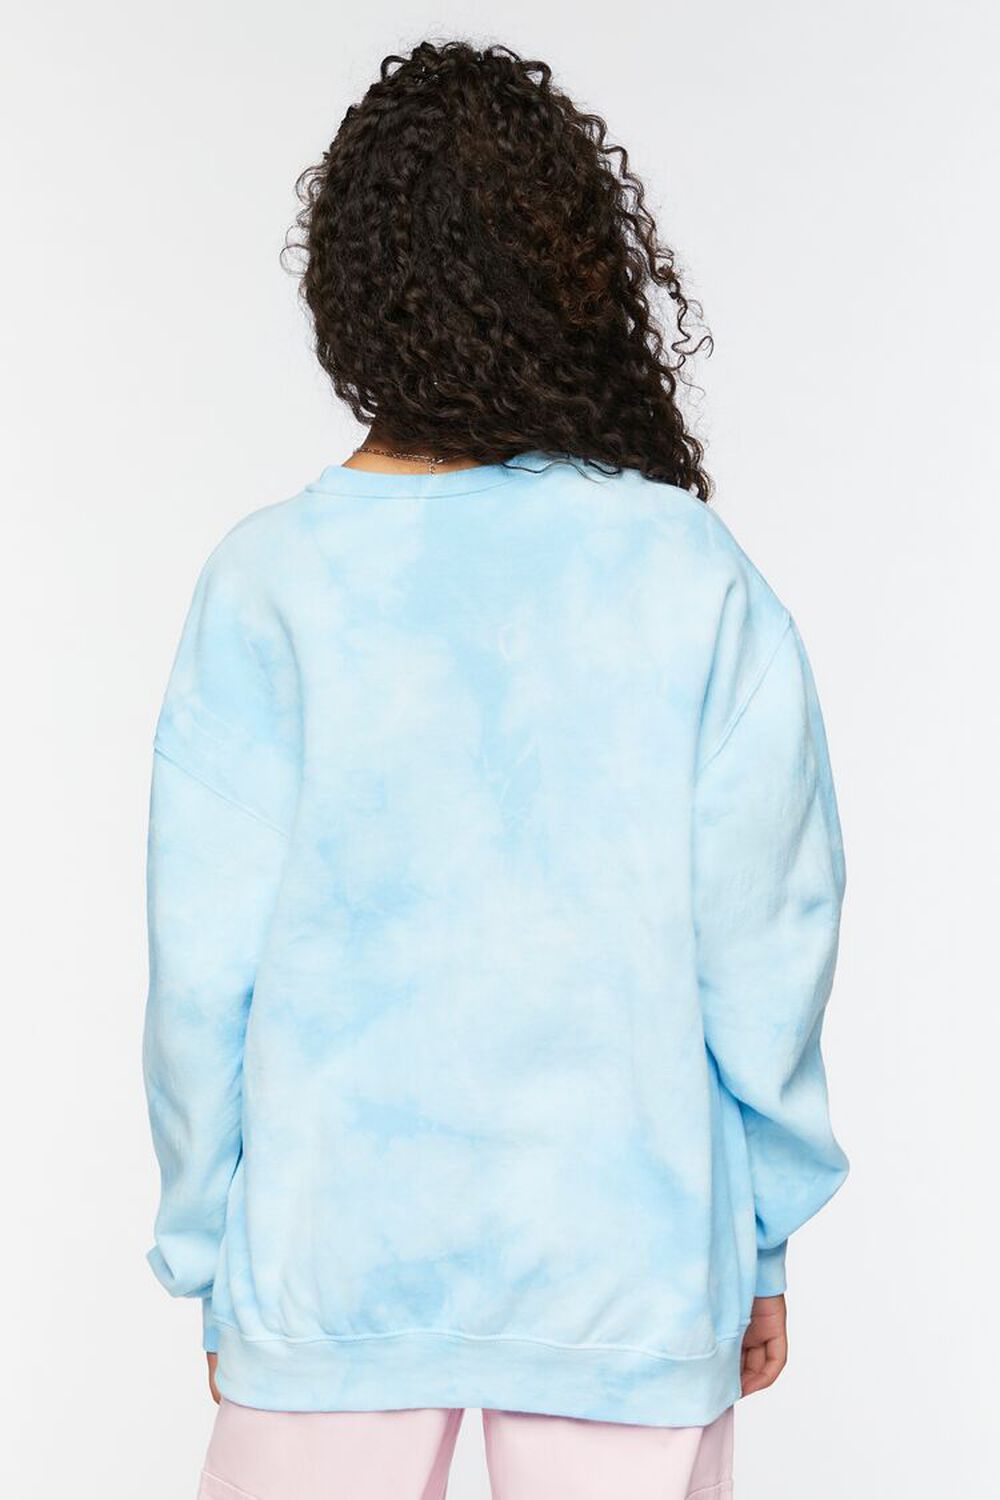 BLUE Tie-Dye My Melody Pullover, image 3